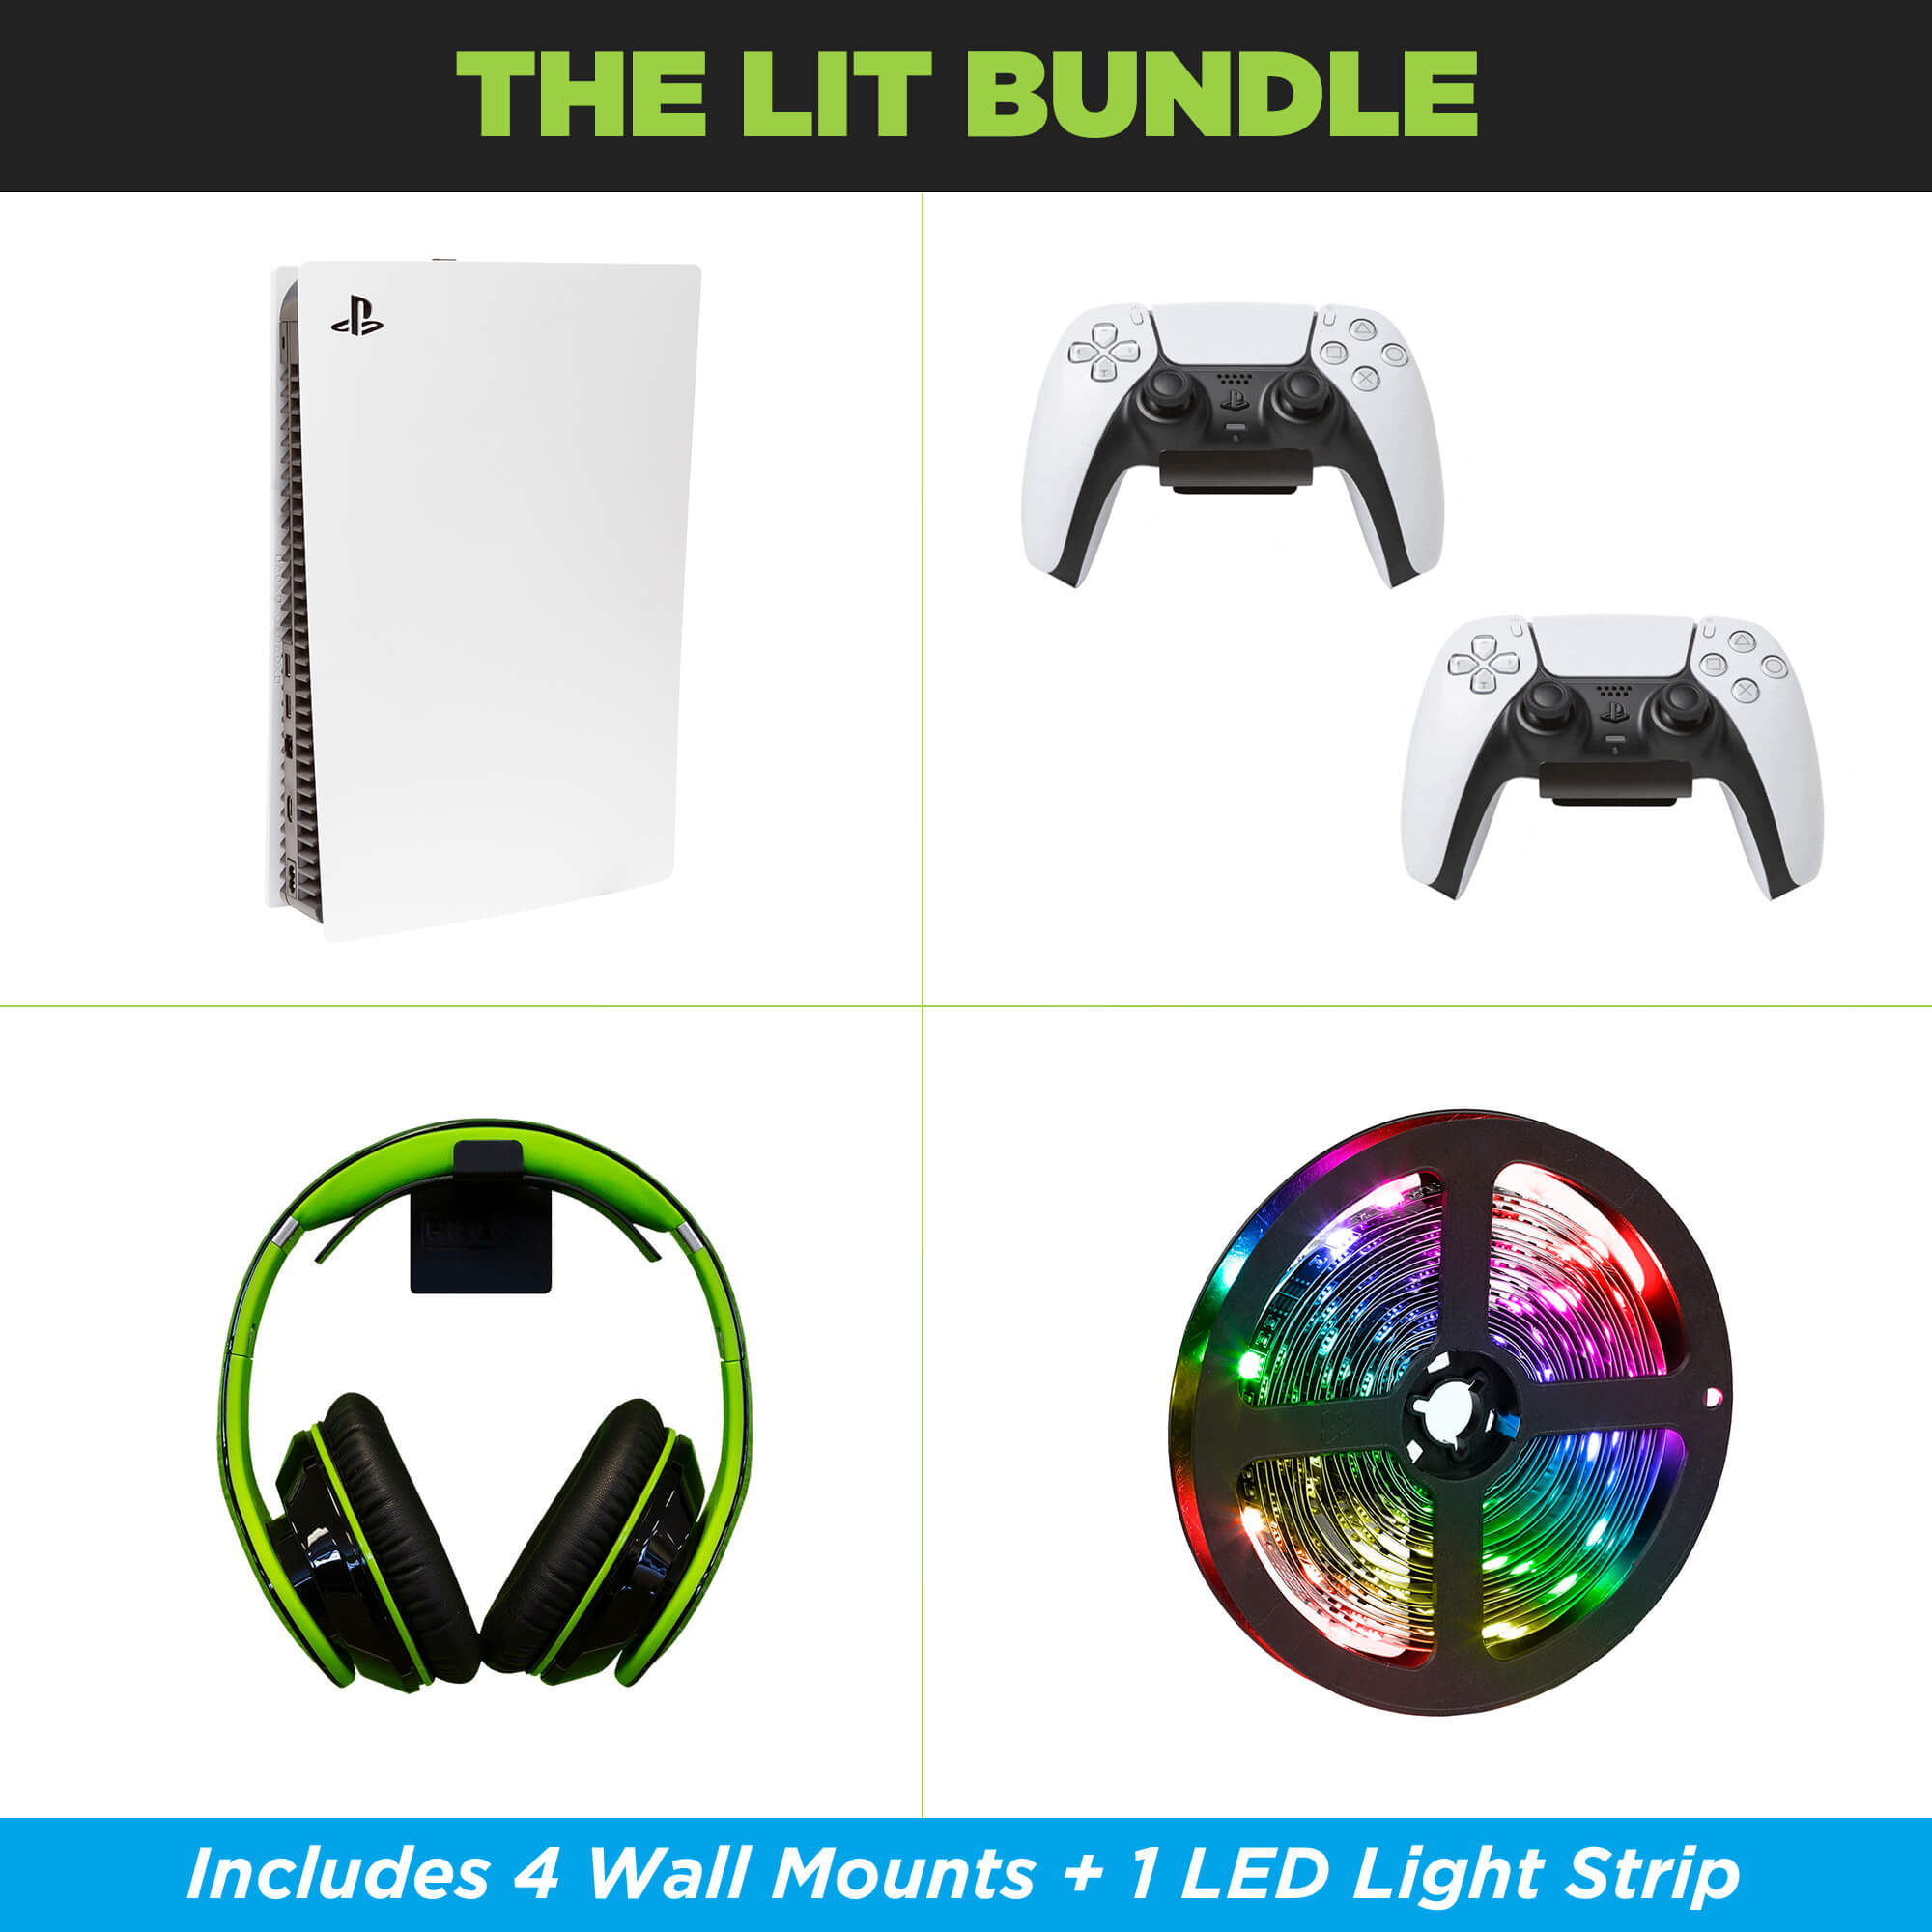 The PS5 Wall Mount Lit Bundle comes with 1 HIDEit PlayStation 5 Wall Mount, 2 Controller Wall Mounts, 1 Headset Wall Mount and 1 LED Strip.